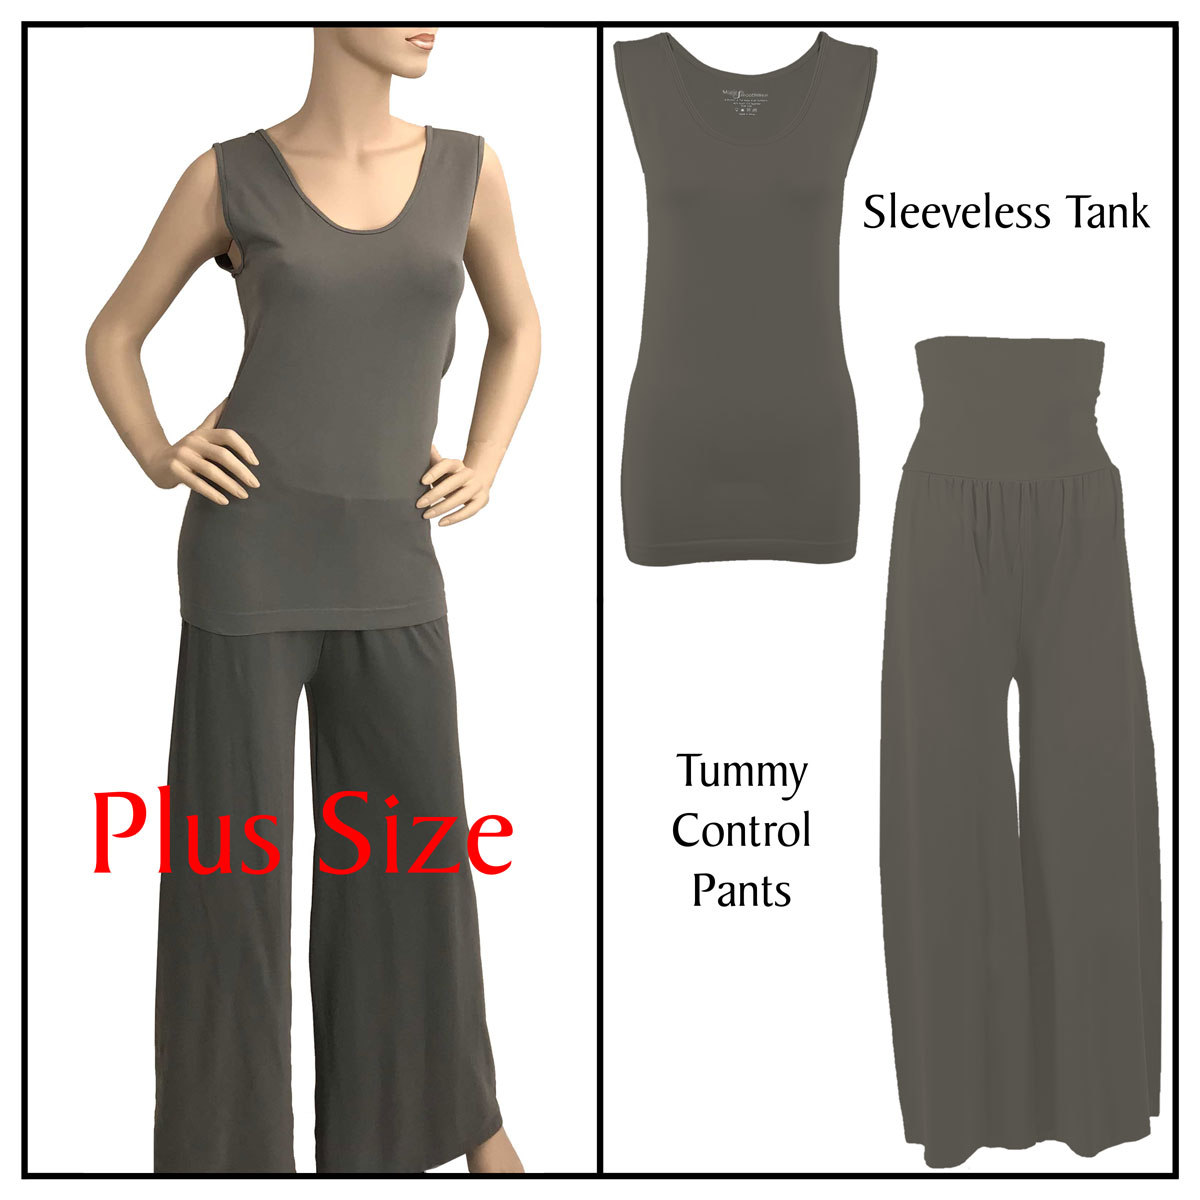 Grey/Charcoal Sleeveless Top (Plus Size) with Pants